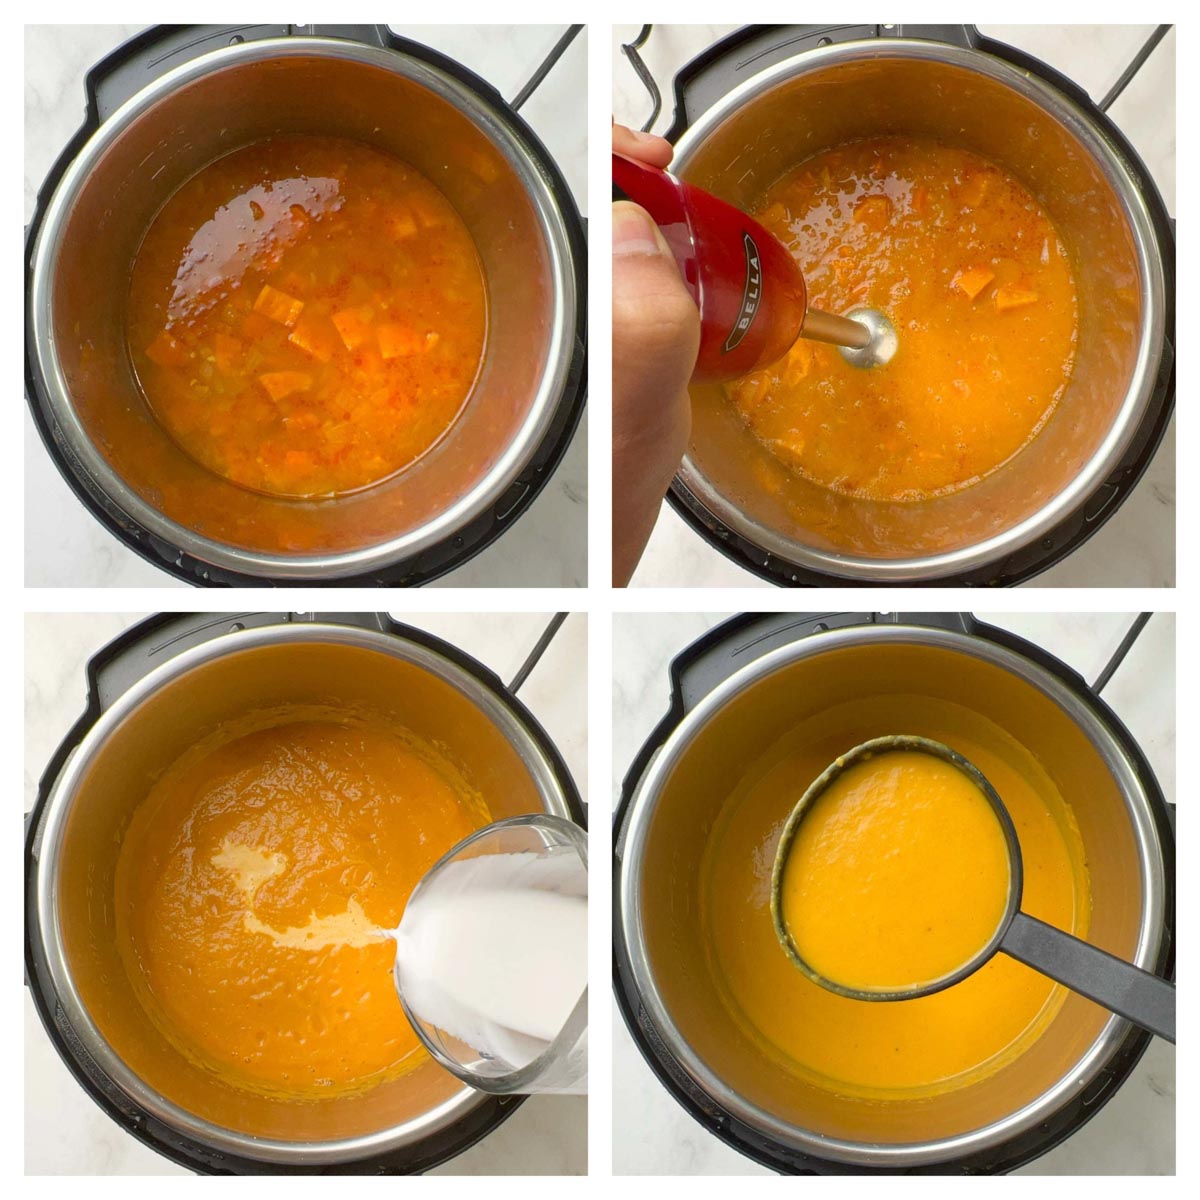 step to blend the soup into smooth and creamy collage